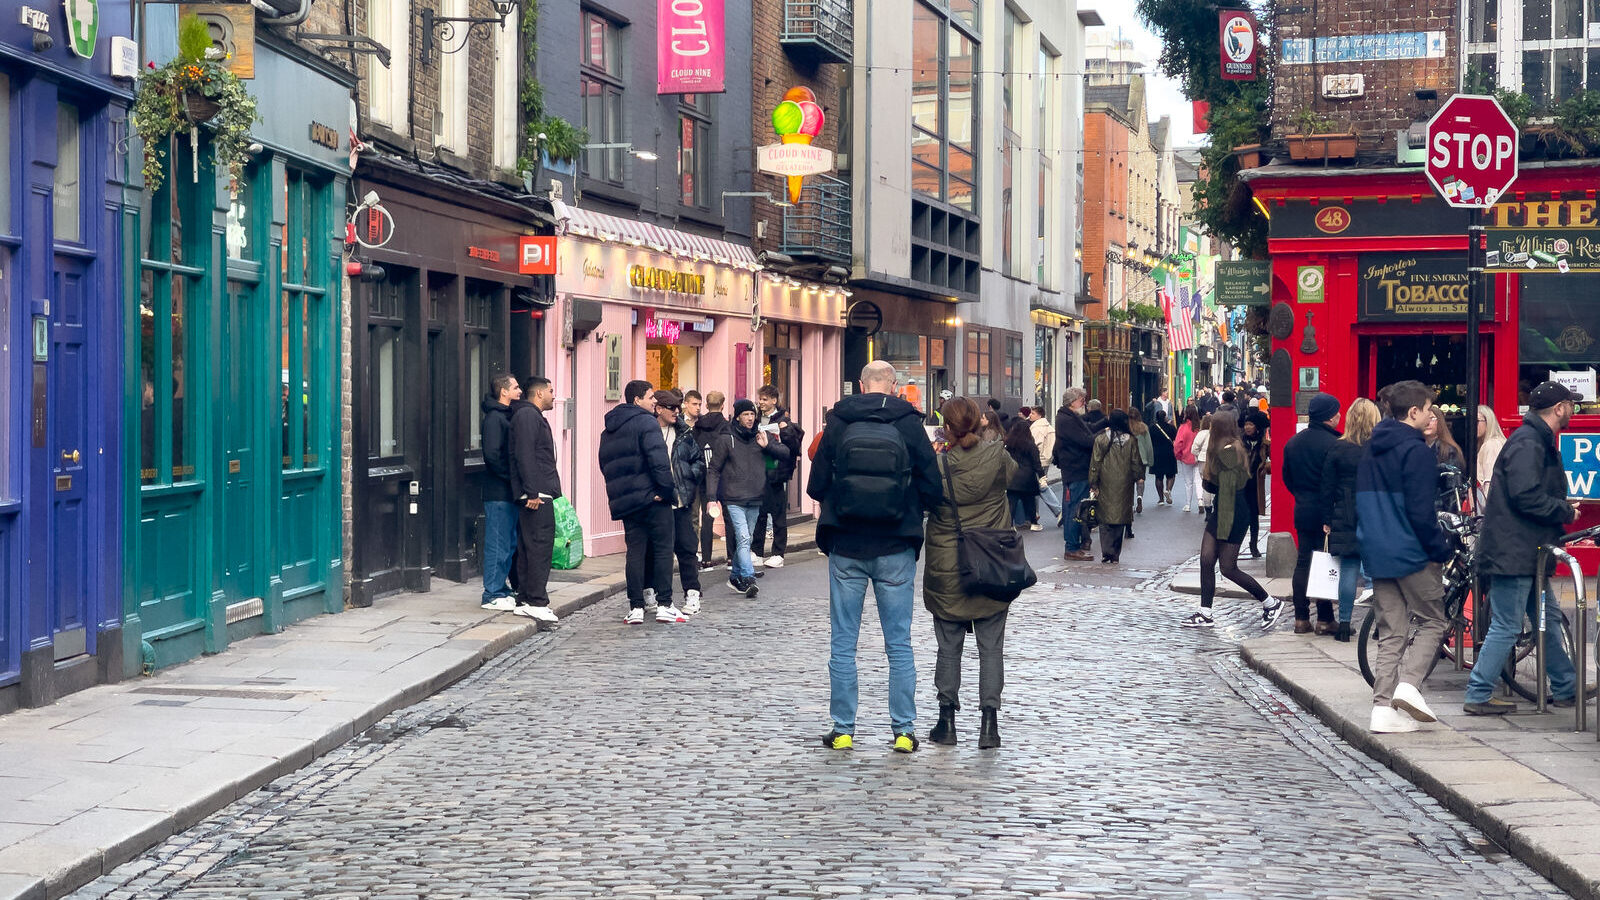 VISITING DUBLIN FOR ST PATRICK'S WEEKEND [IS TEMPLE BAR AS GOOD AS MANY CLAIM IT TO BE?]-229477-1